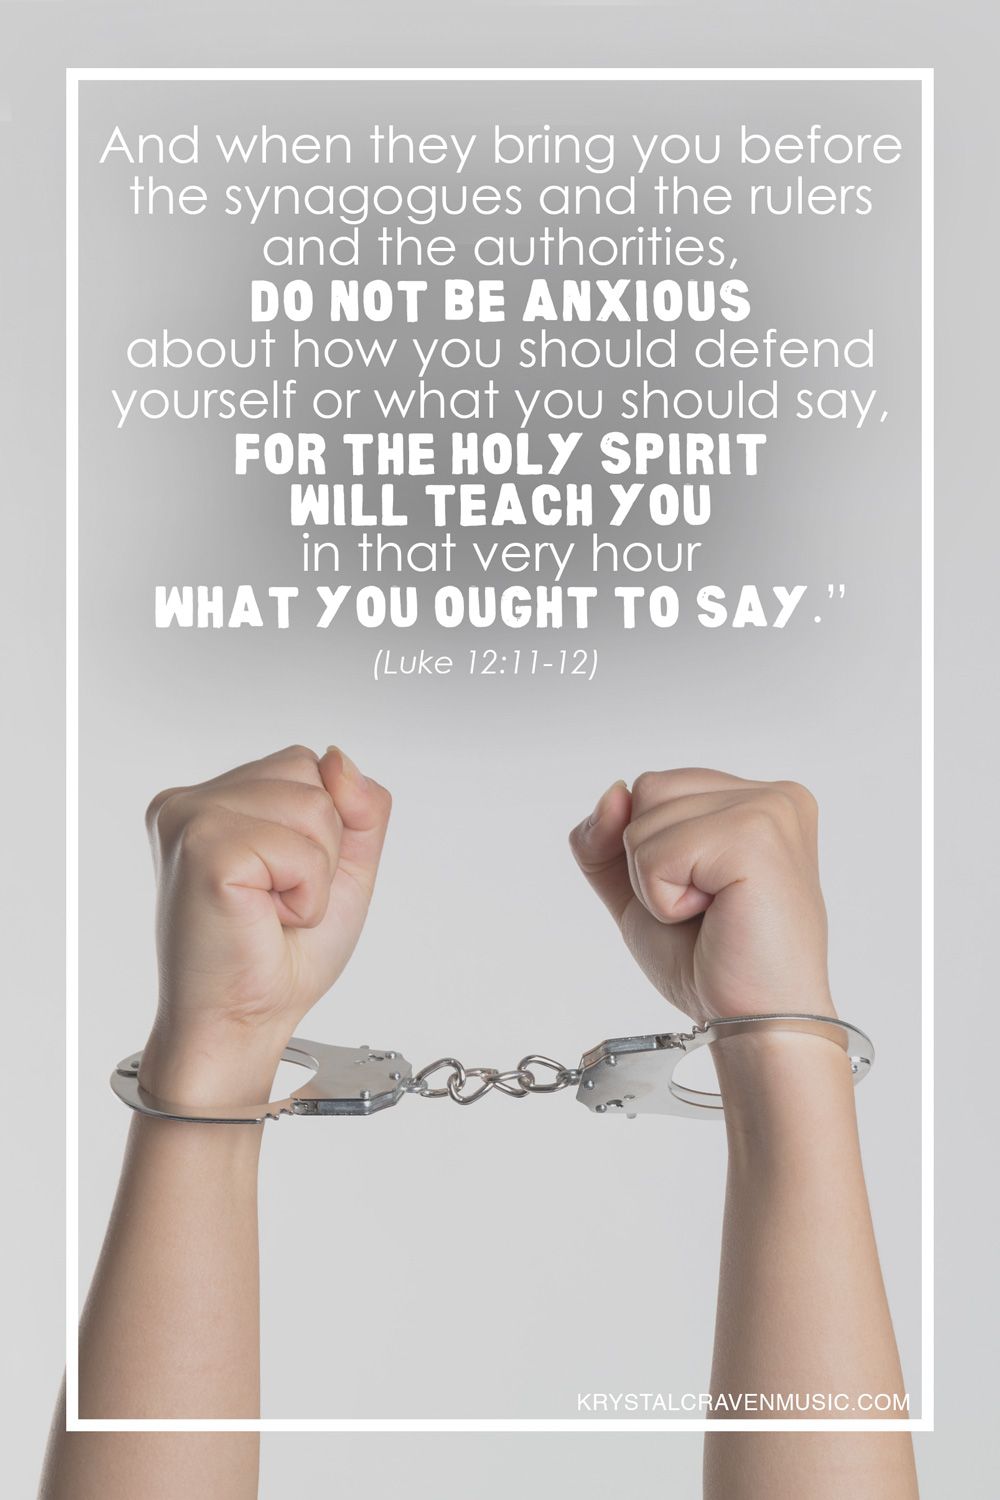 The text from Luke 12:11-12 "And when they bring you before the synagogues and the rulers and the authorities, do not be anxious about how you should defend yourself or what you should say, for the Holy Spirit will teach you in that very hour what you ought to say." over a picture of two handcuffed hands.